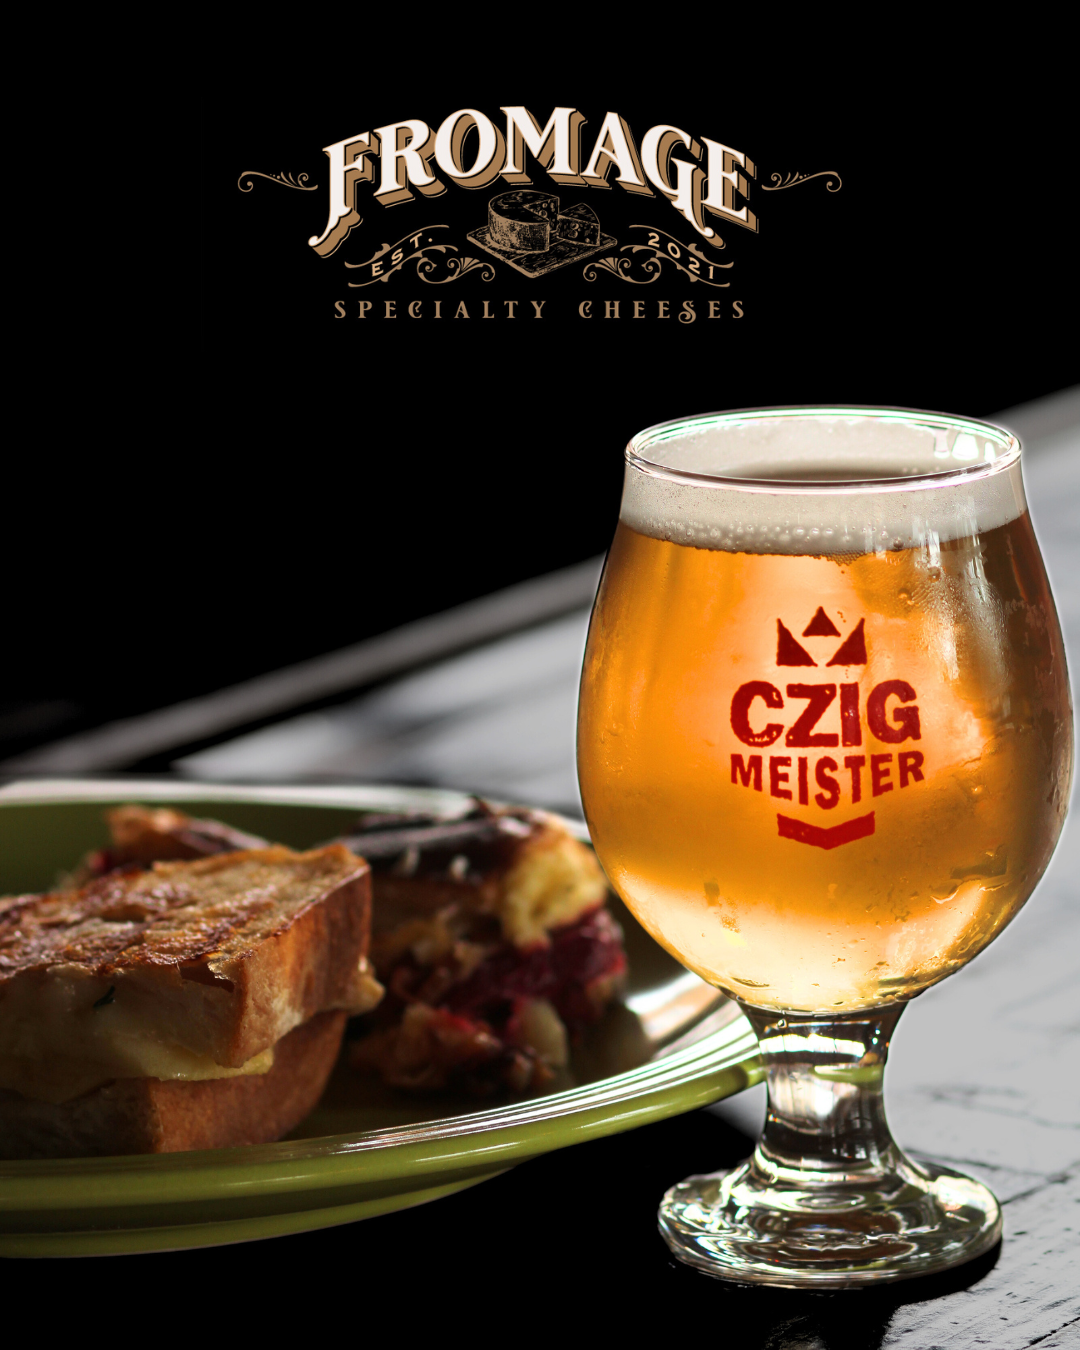 April 28th | 12:30pm Beer and Grilled Cheese Pairing